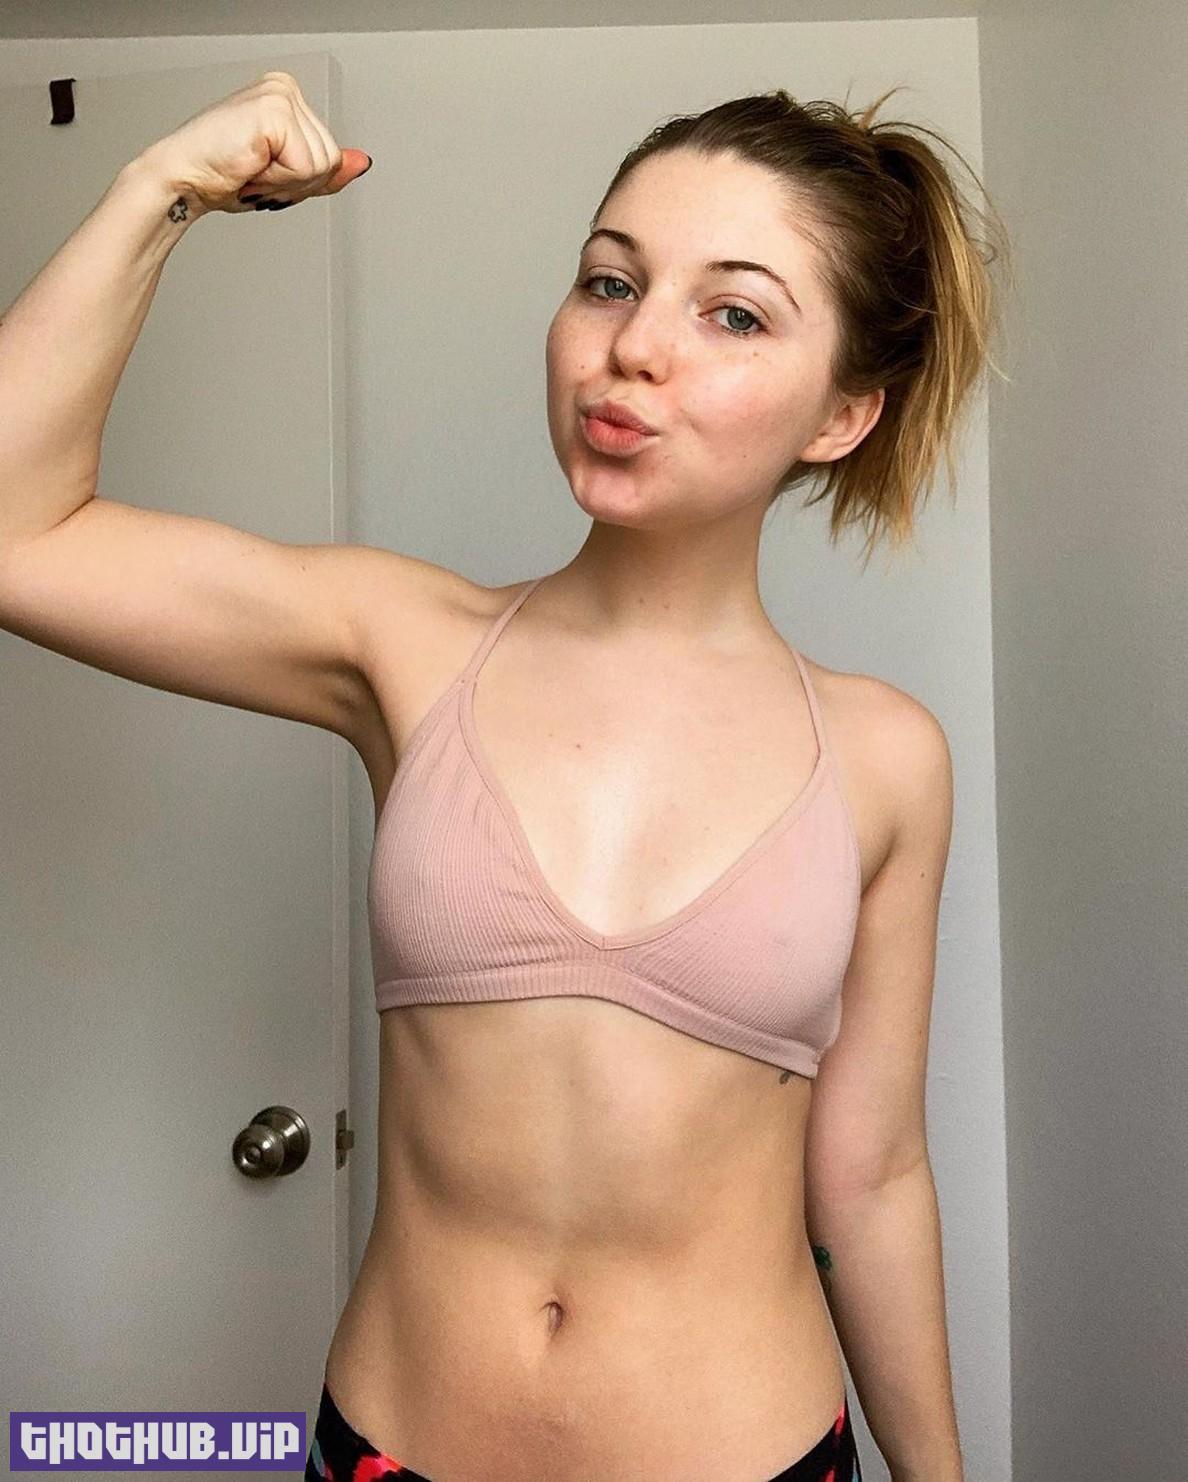 1682649604 740 Sammi Hanratty Topless Cendored And Sexy 51 Photos And Videos